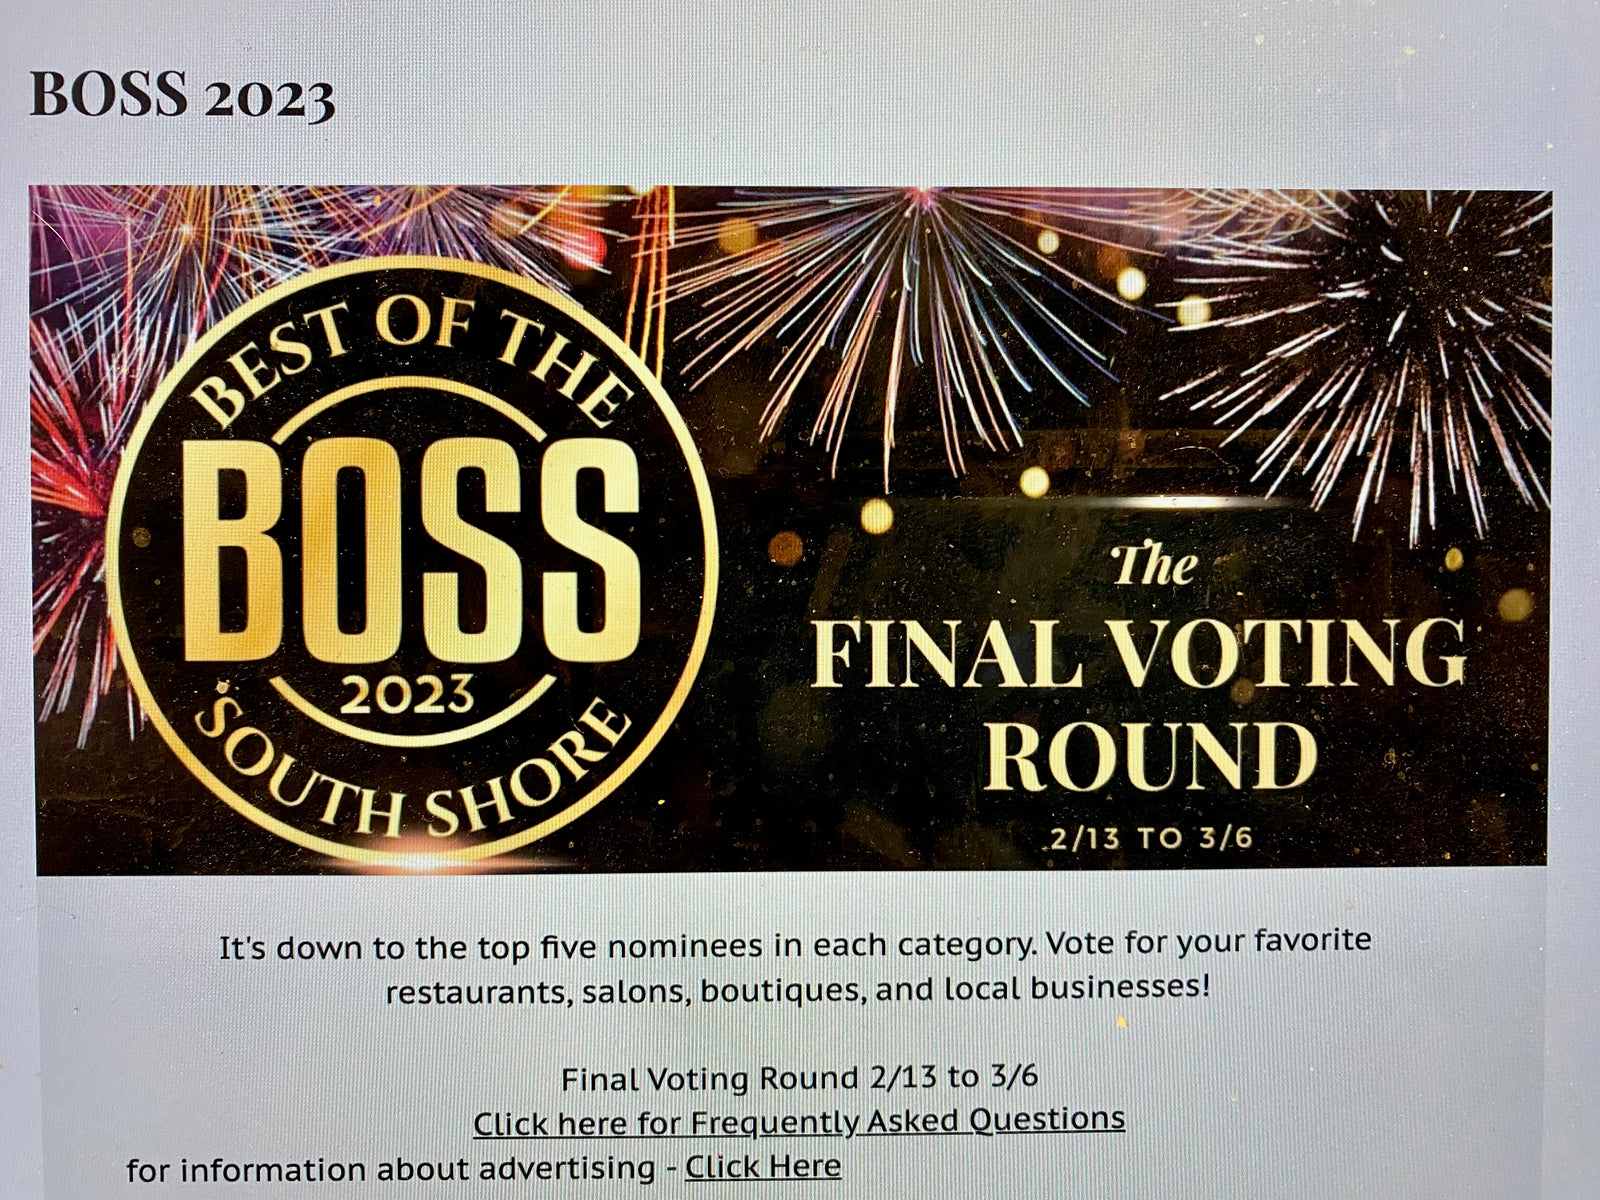 Nominated for Best of South Shore 2023 BOSS